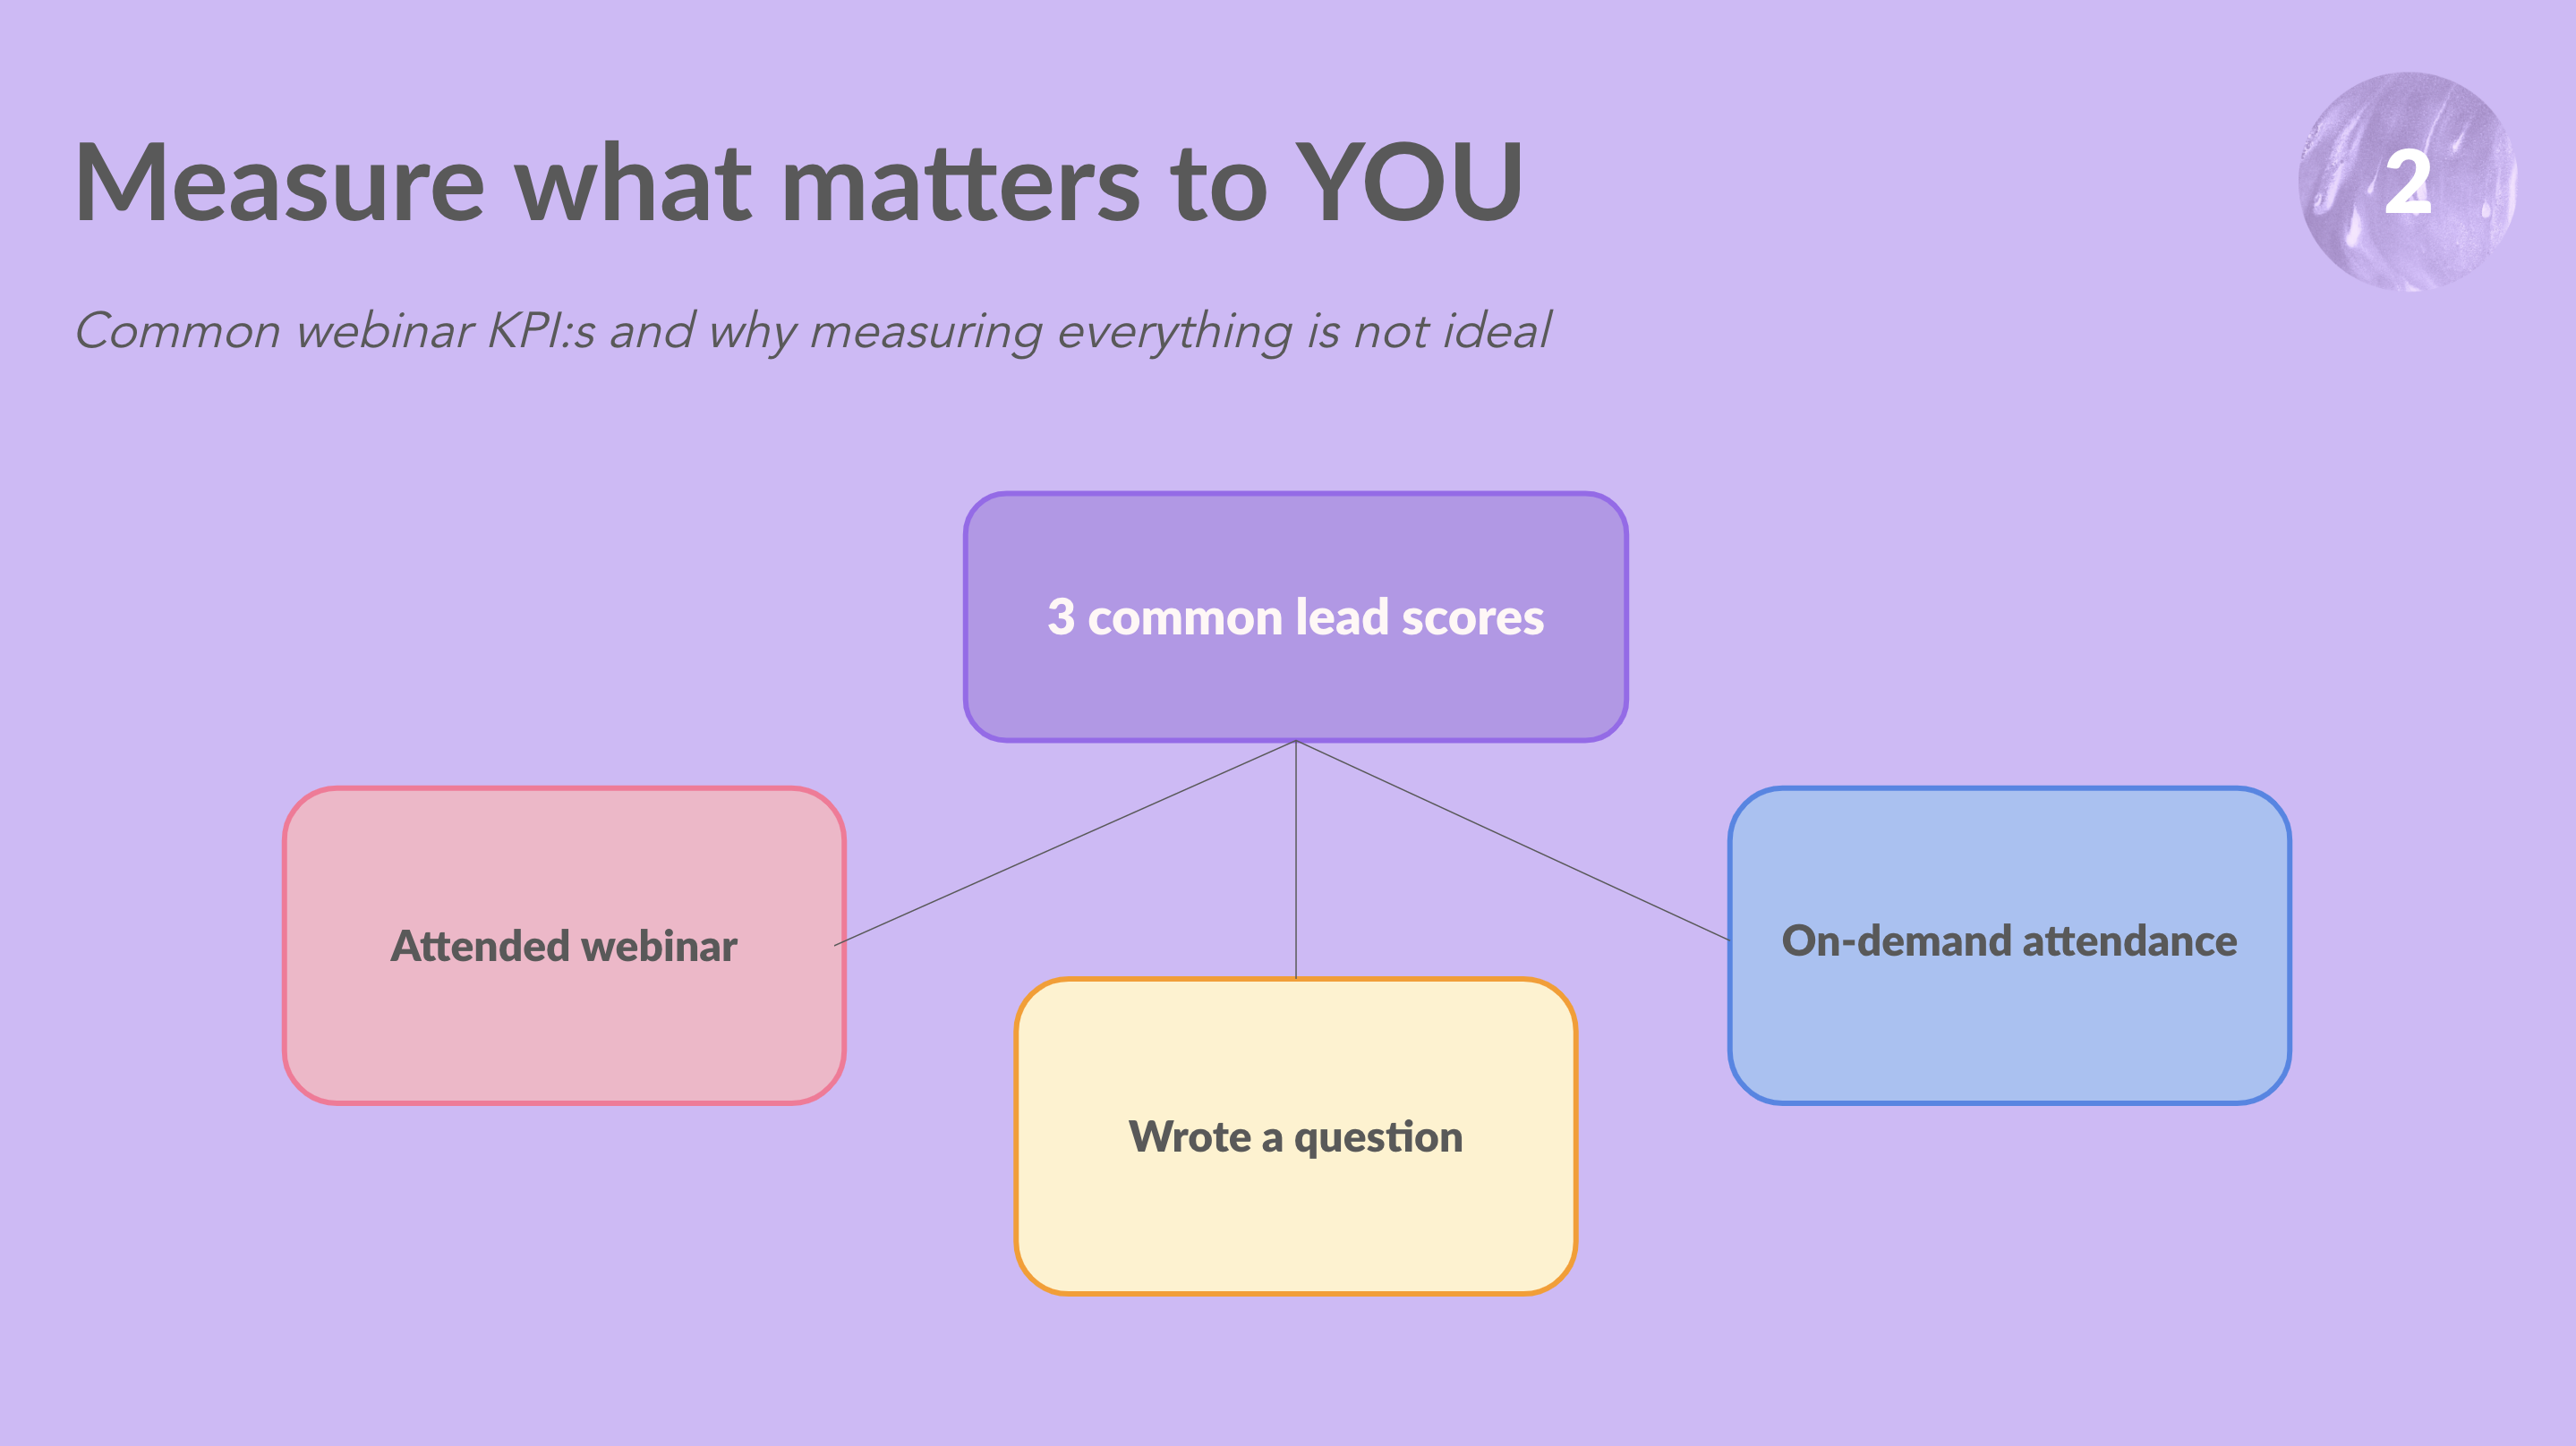 Measure what matters to you and your webinar